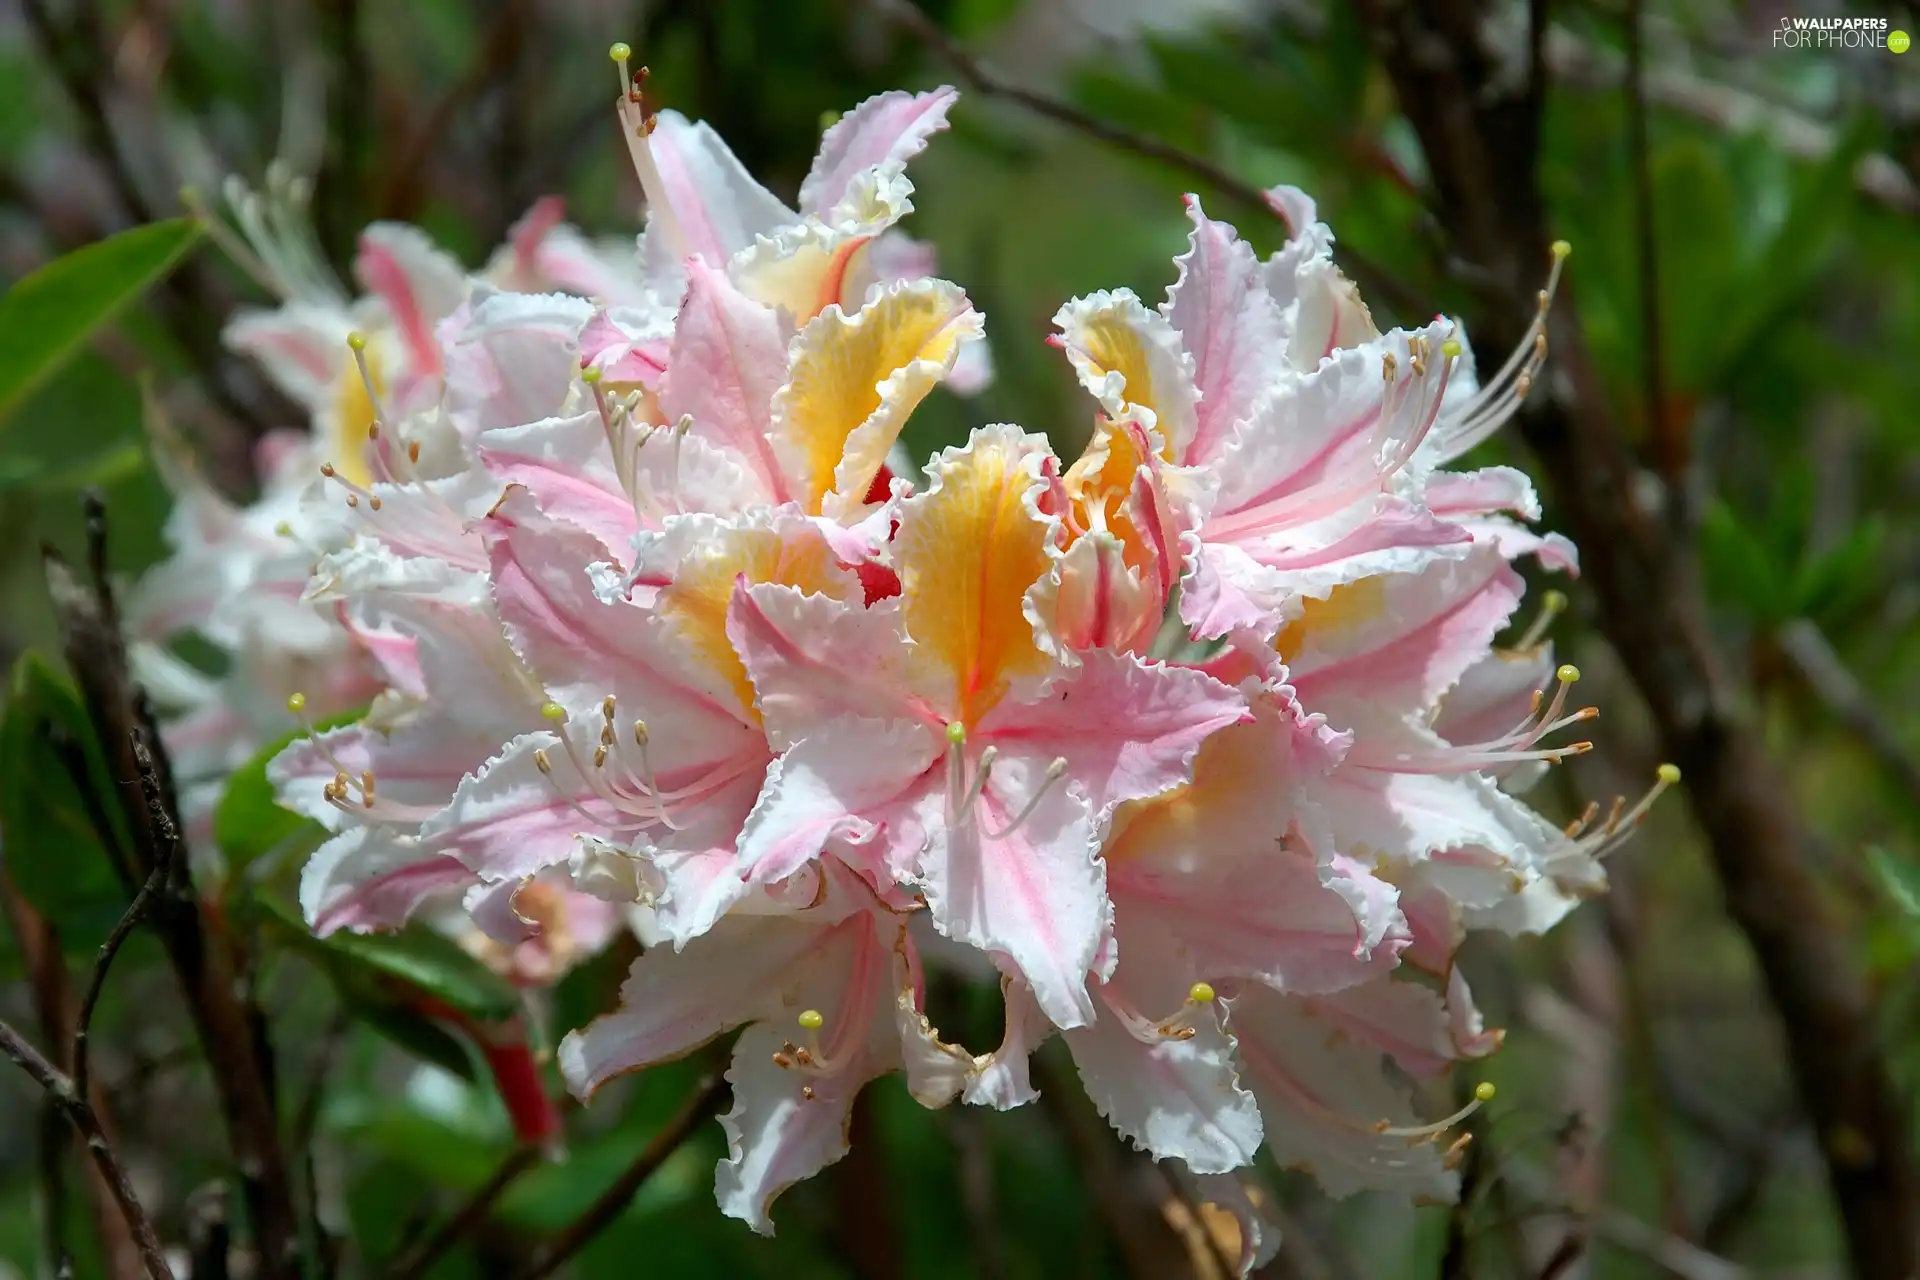 rhododendron, Rhododendron, Occidentale, western